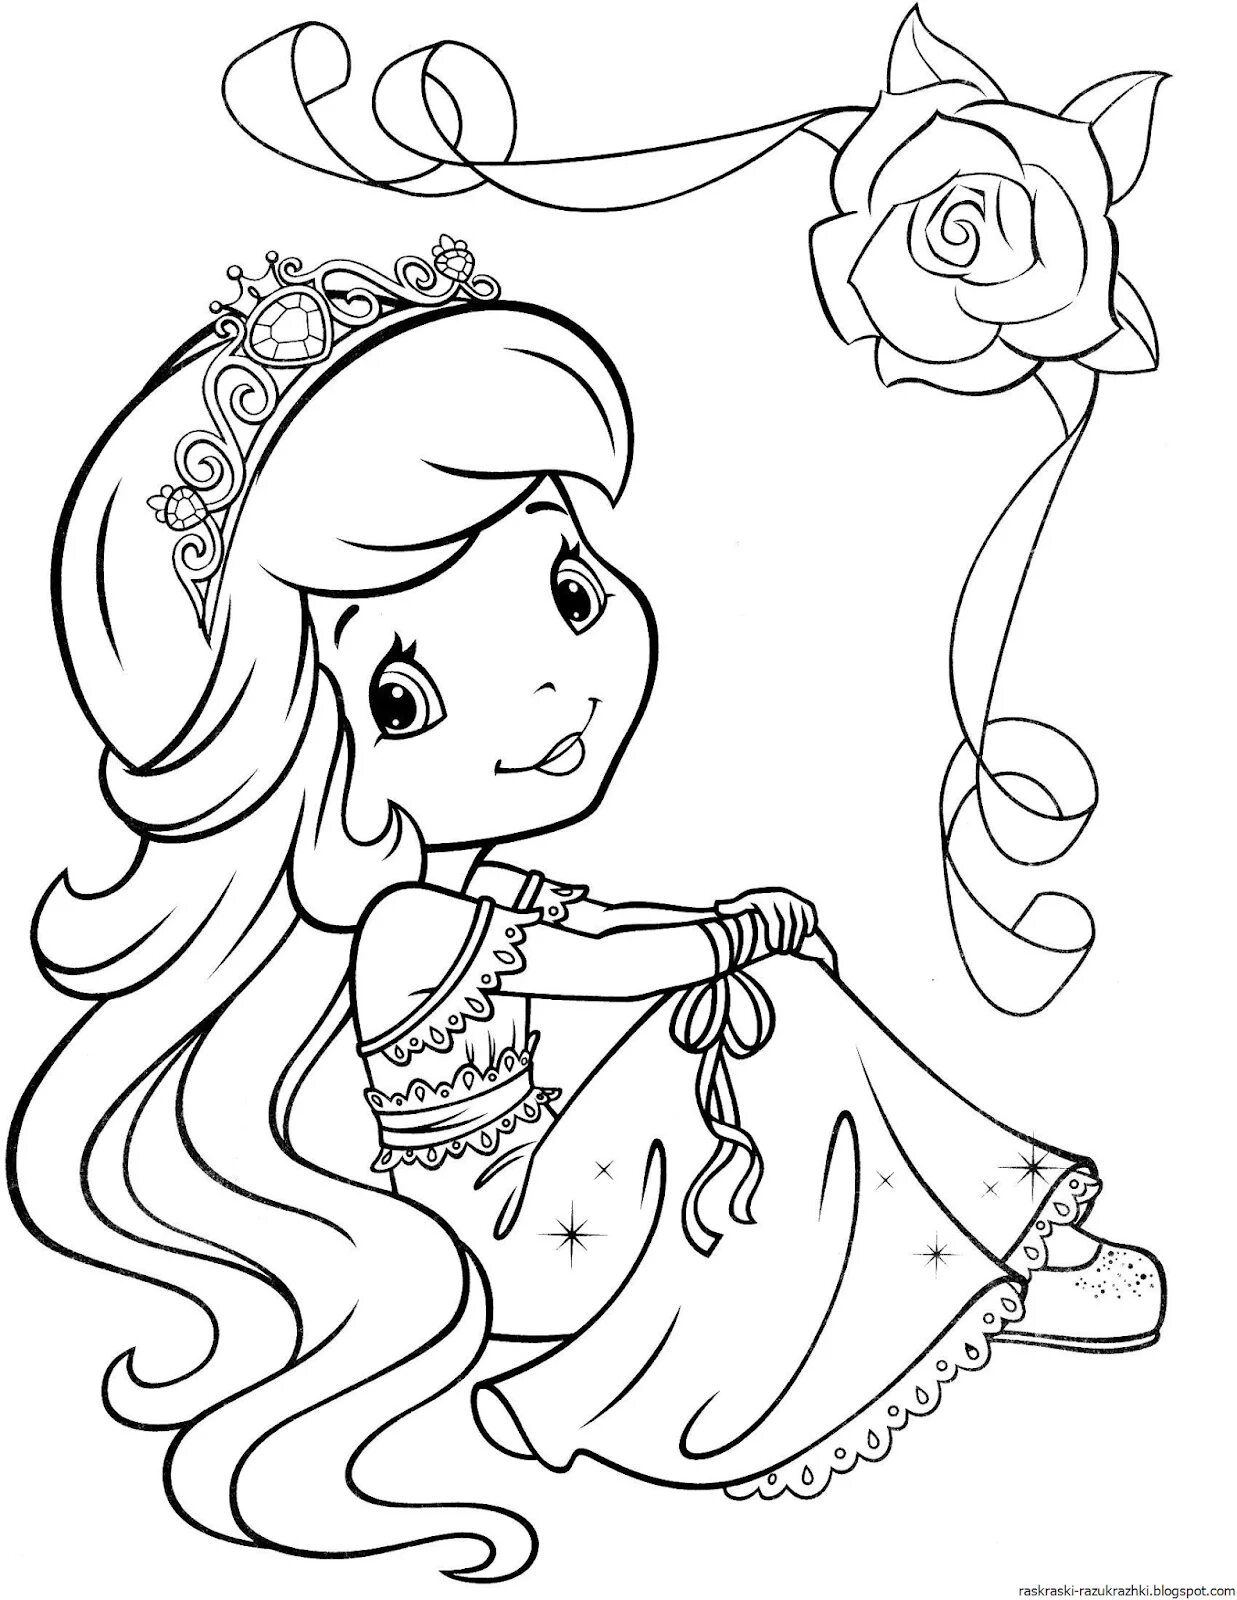 Glamorous Yandex coloring book for girls